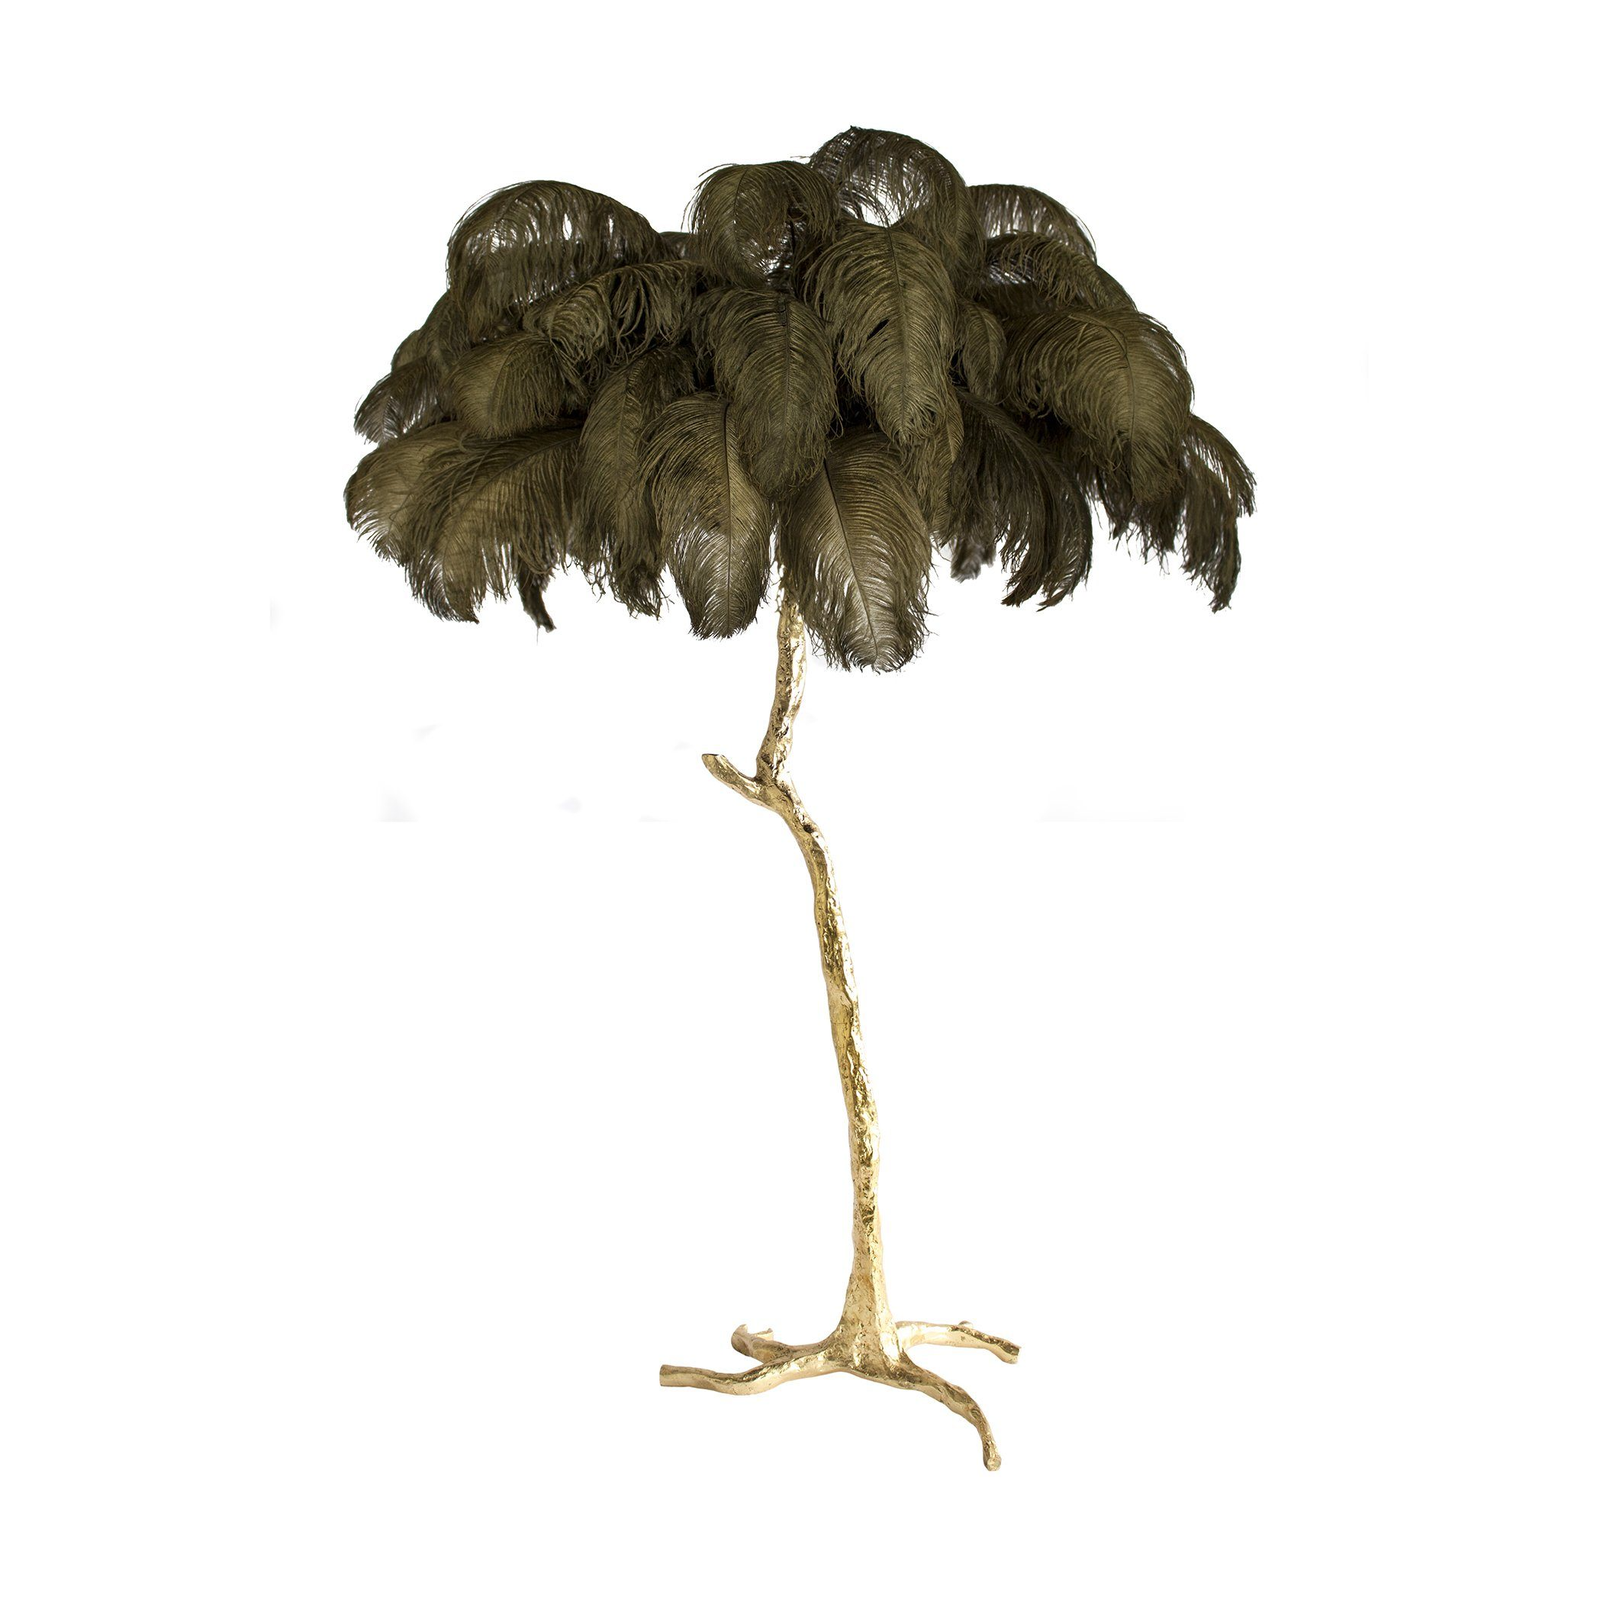 Resin Floor Light with Ostrich Feather detailing, measuring ∅ 39.4″ x H 63″ (Dia 100cm x H 160cm) in a Gold and Moss green color combination.